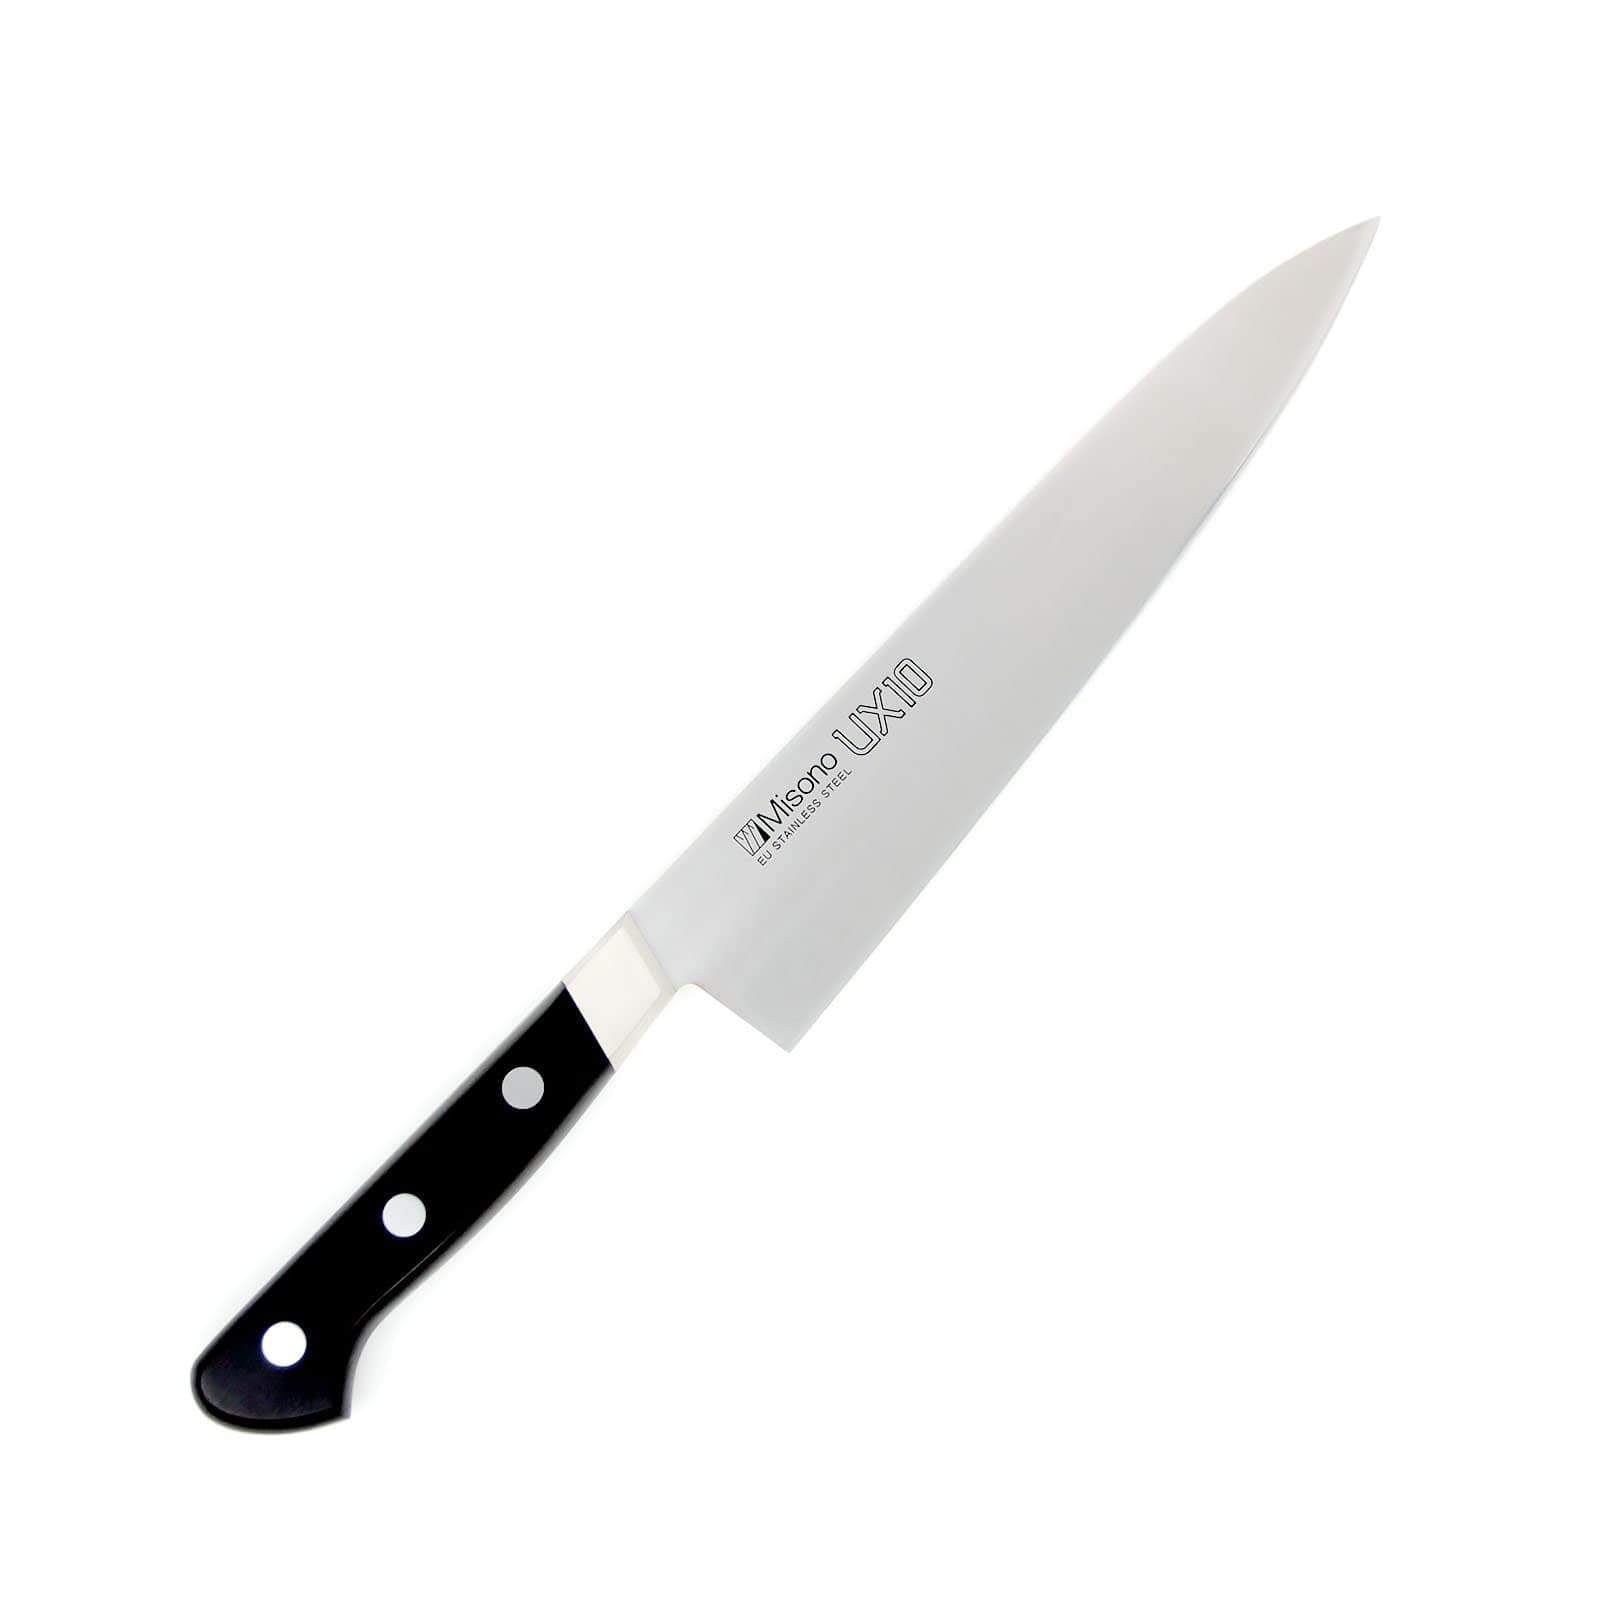 Matsato Knife Reviews – What can the kitchen knife do?